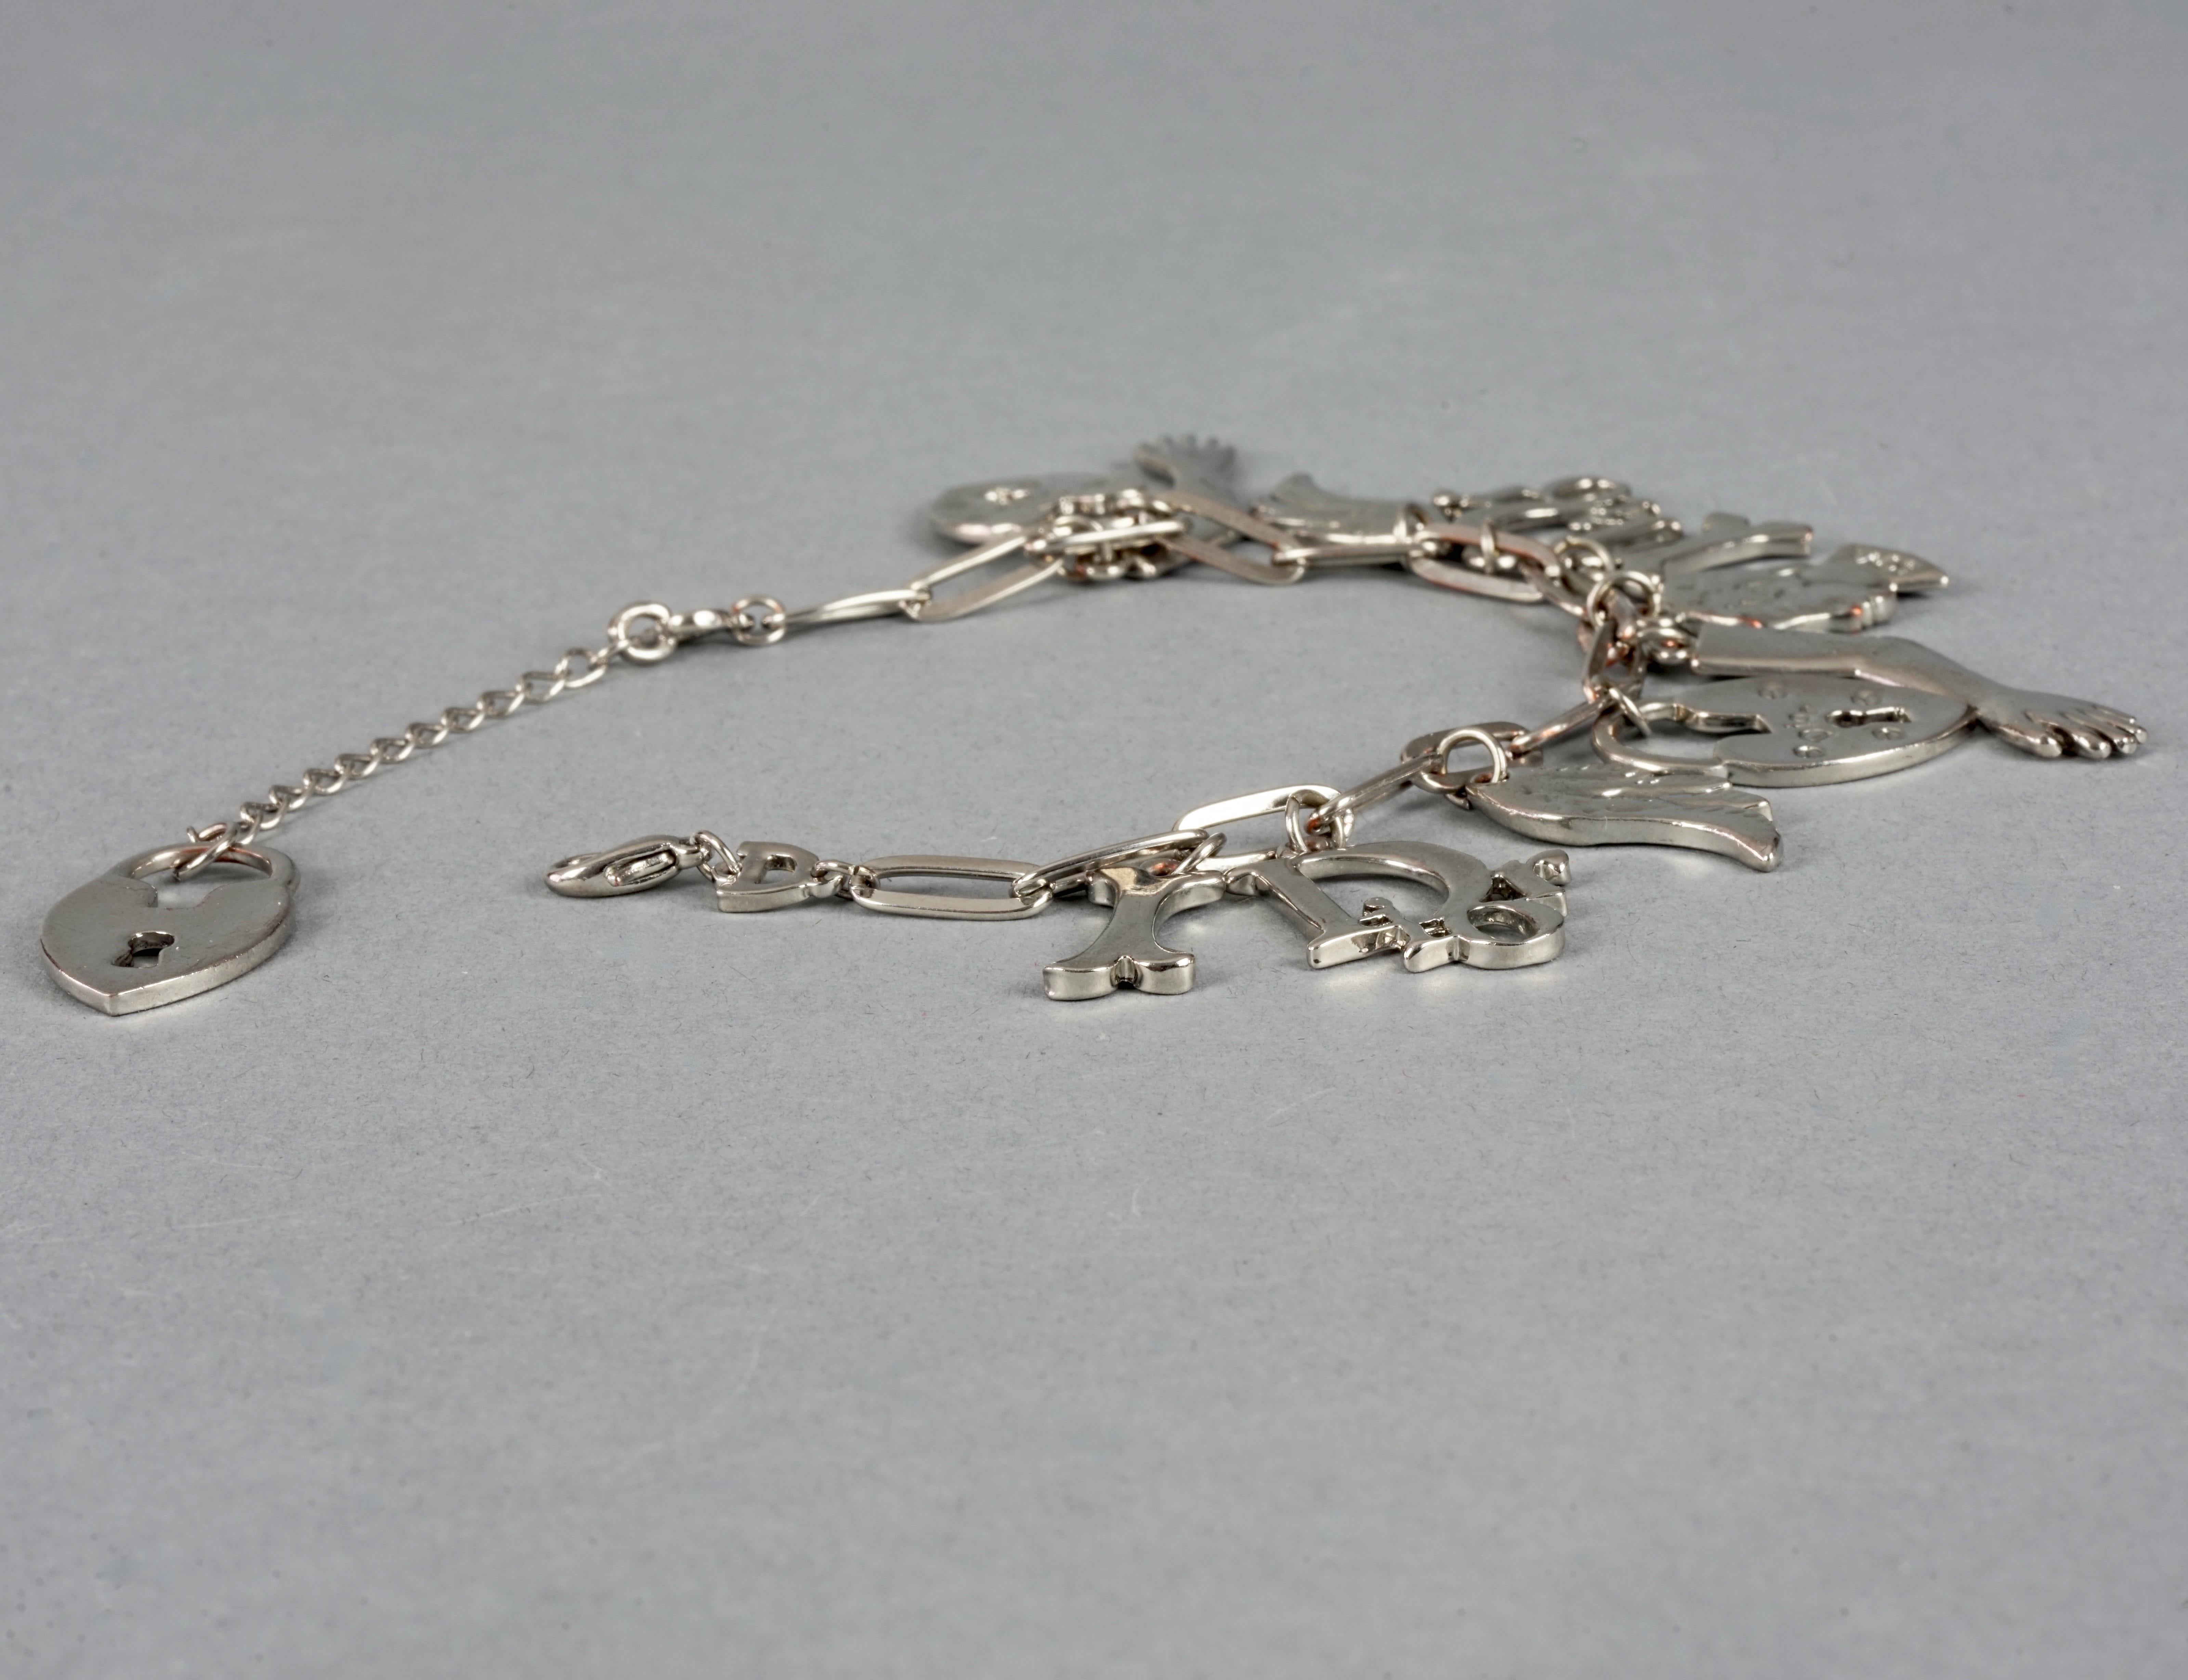 Vintage CHRISTIAN DIOR by GALLIANO Figural Charm Silver Bracelet In Good Condition For Sale In Kingersheim, Alsace